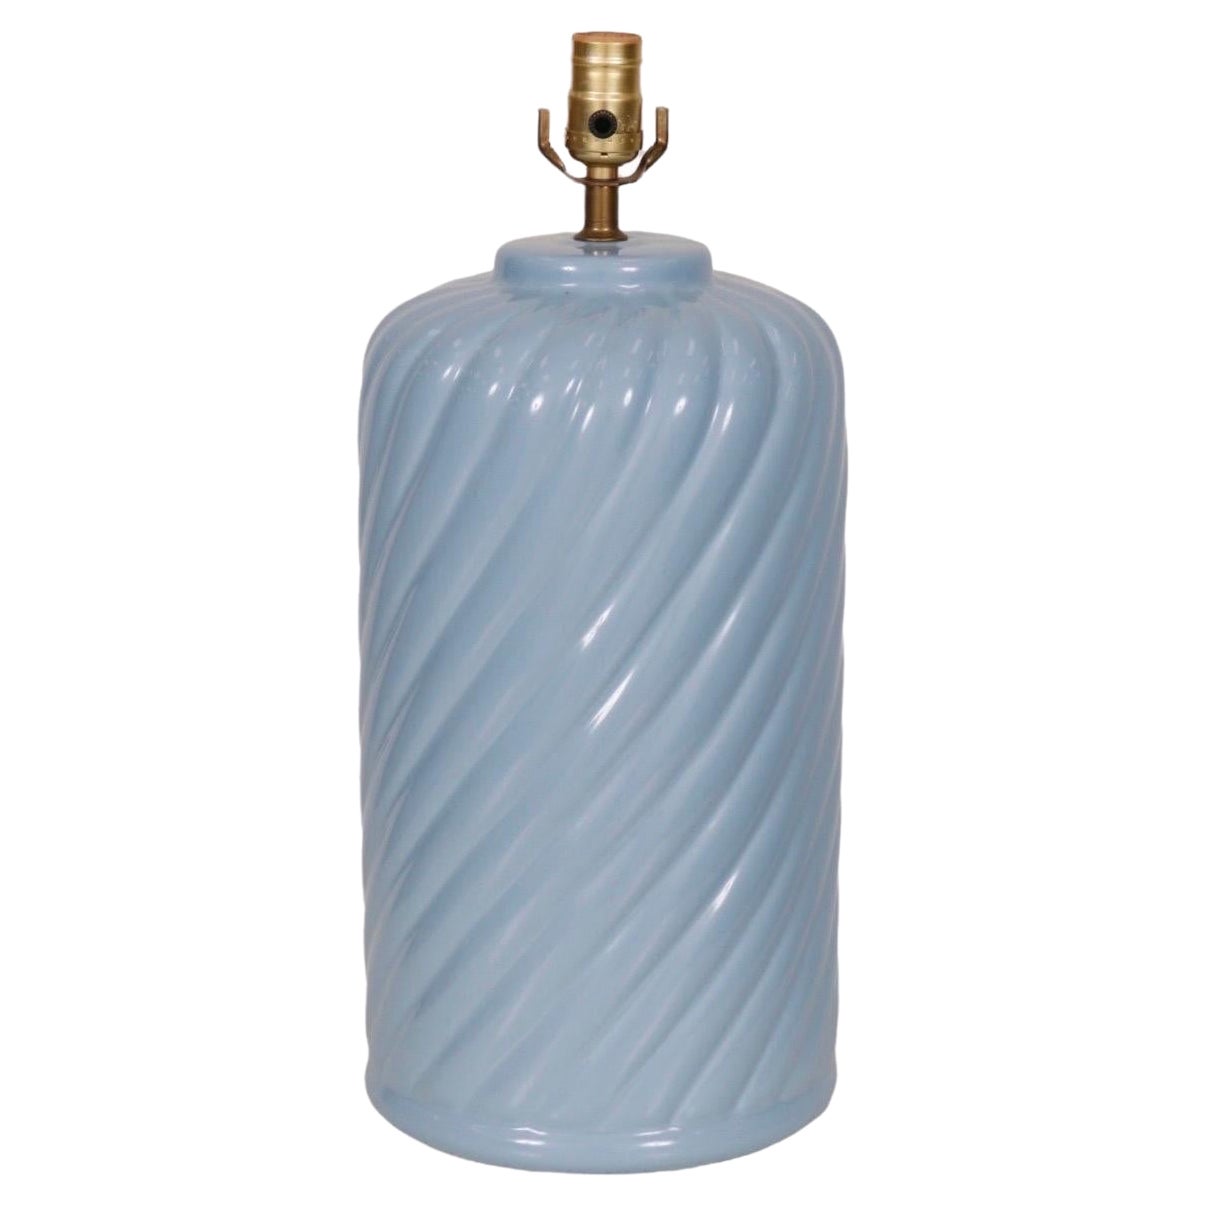 Ceramic Table Lamp in Periwinkle Blue For Sale